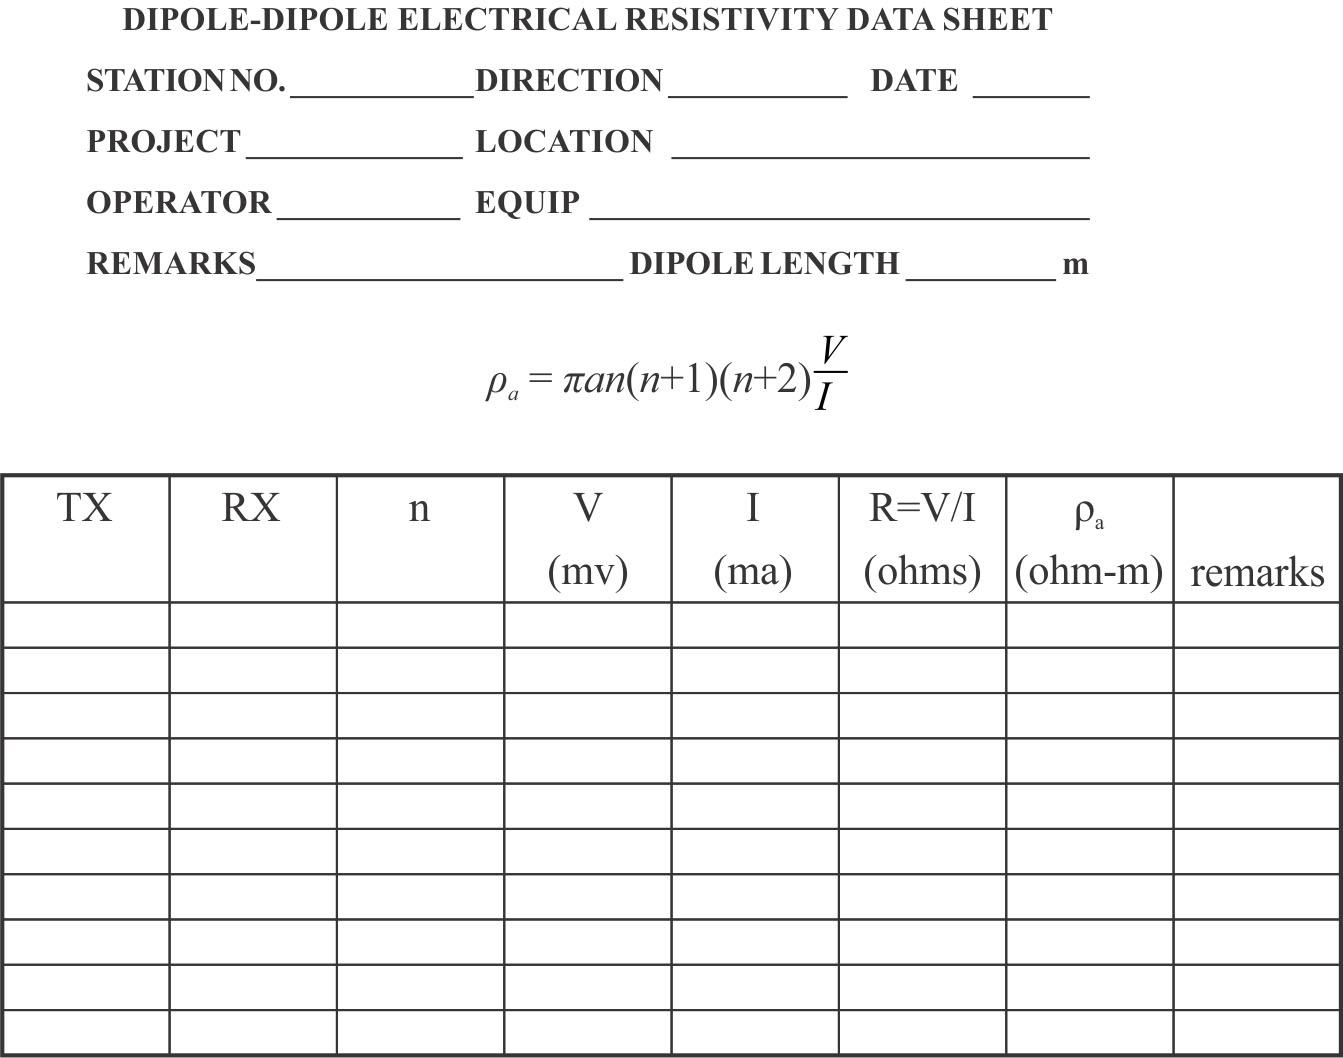 Example data sheet for dipole-dipole array.